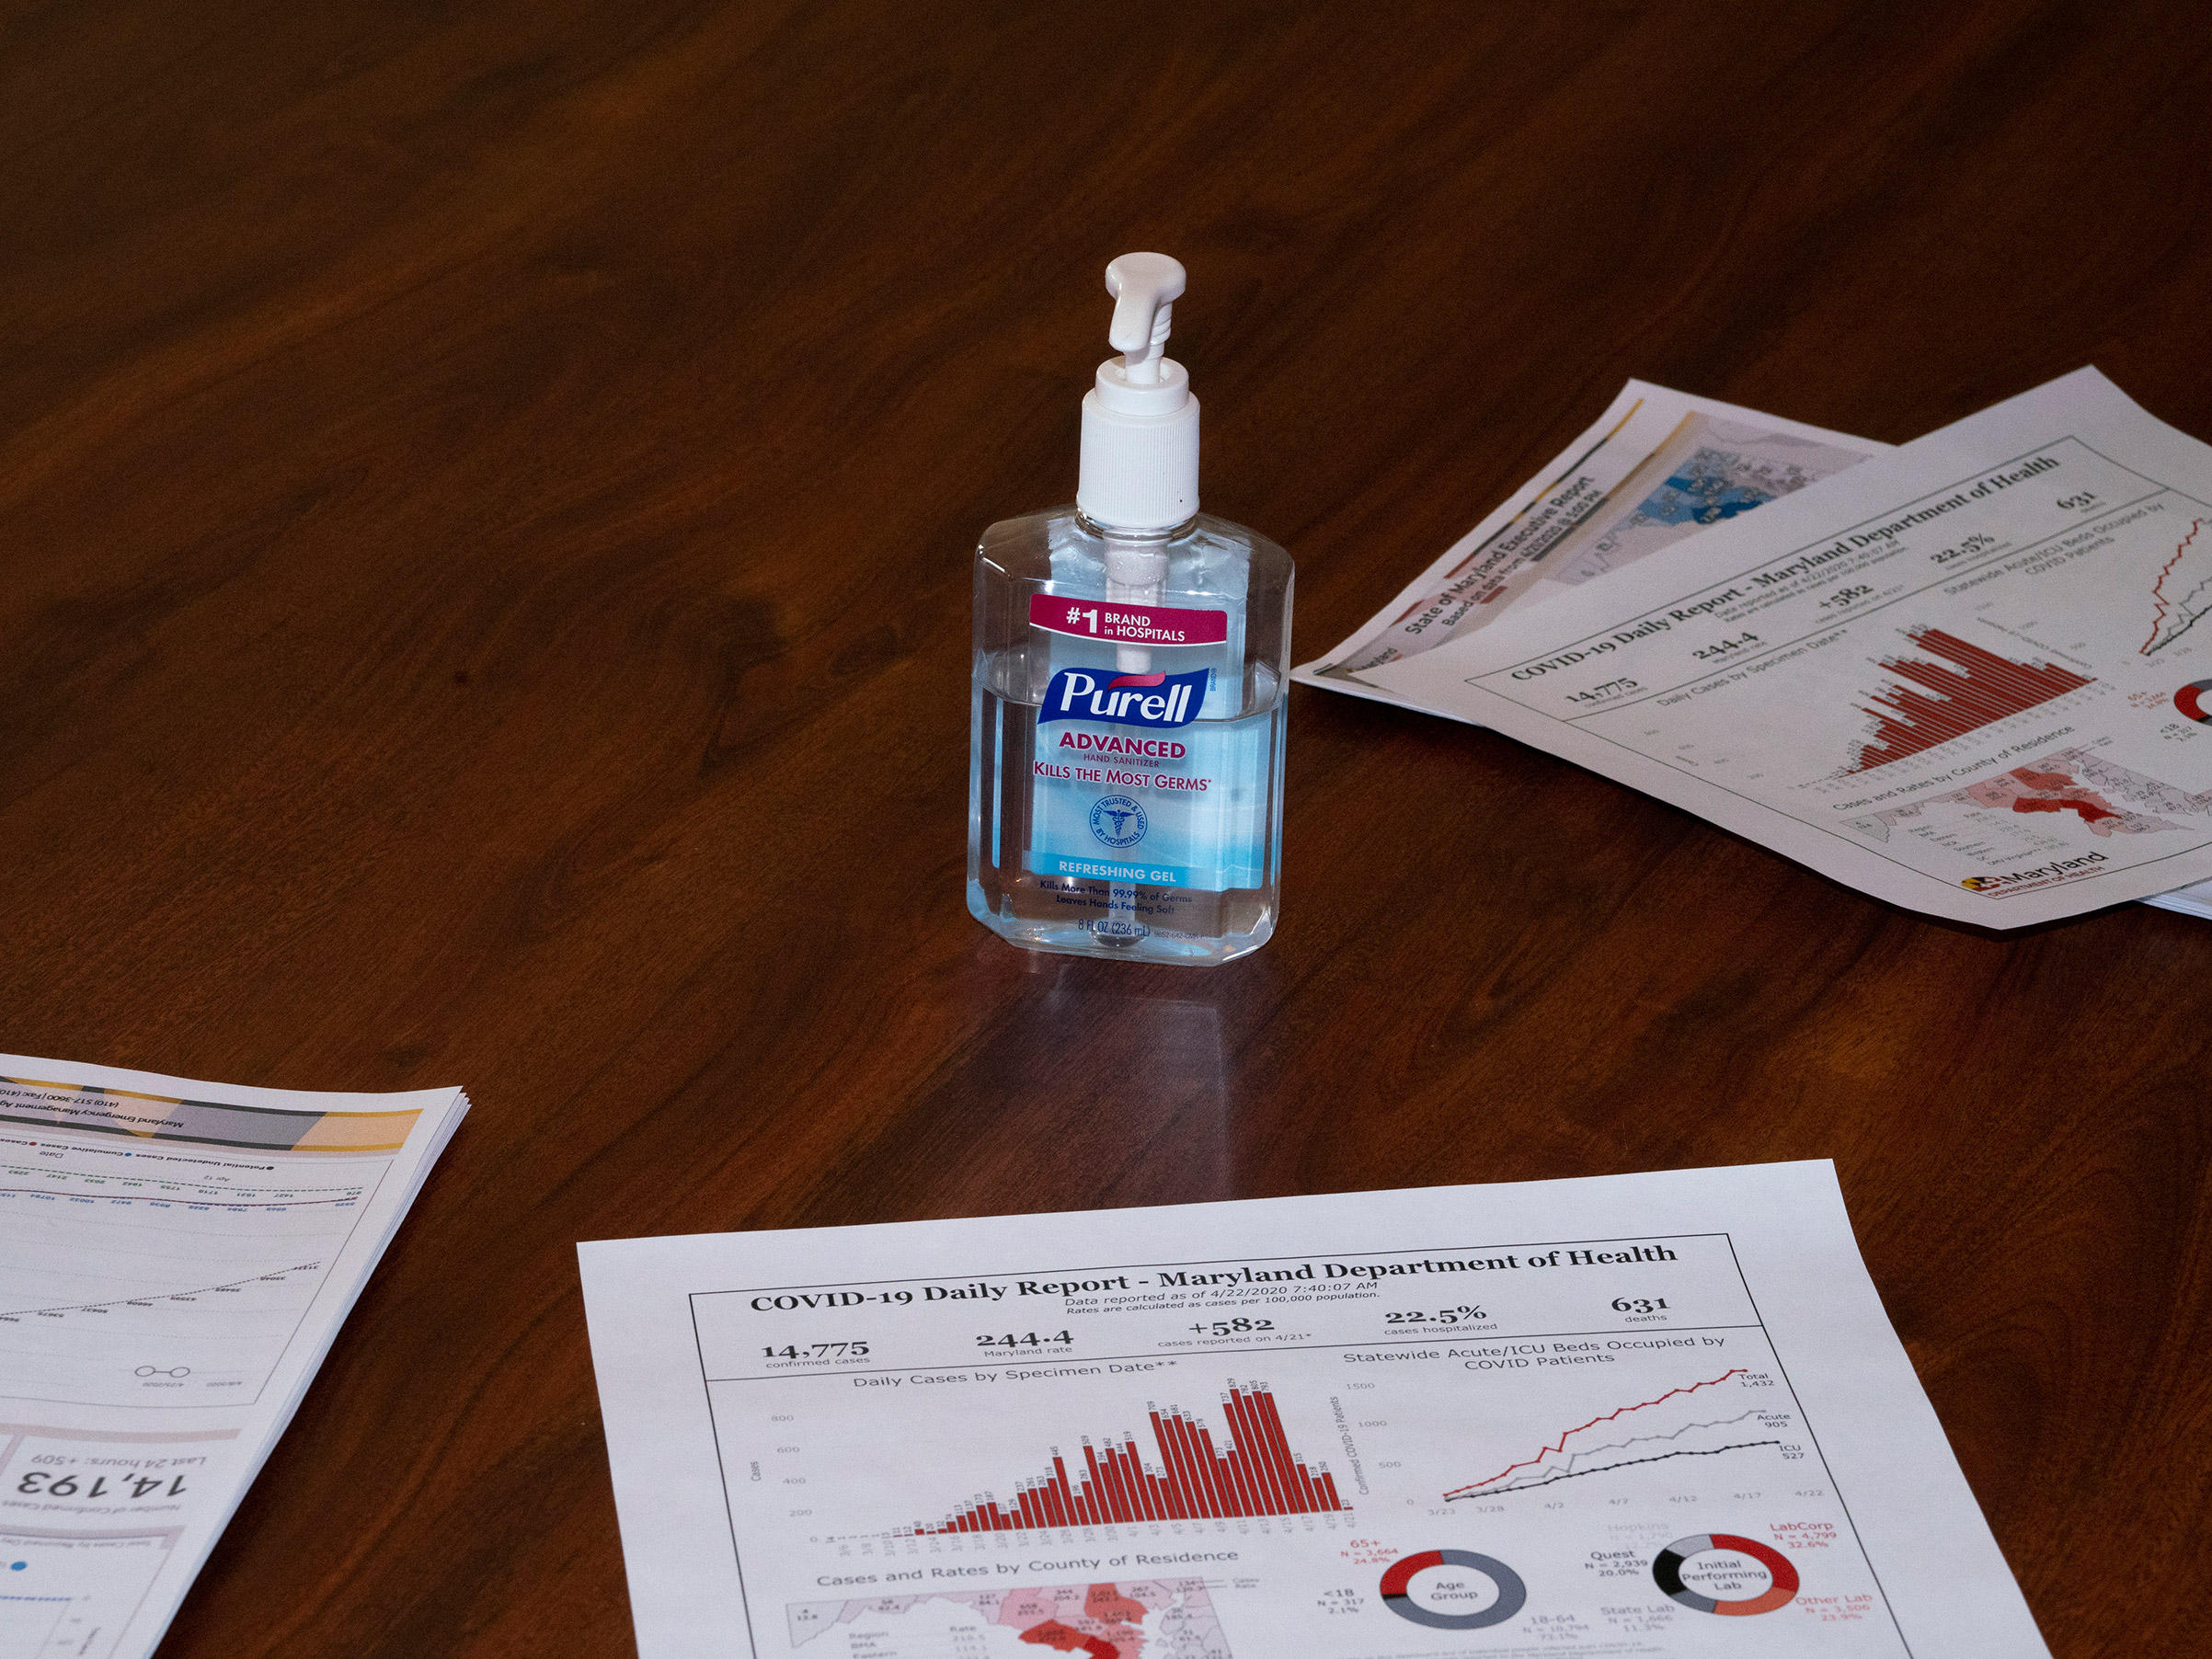 Purell and Coronavirus statistics on a conference room table during a meeting between Governor Larry Hogan and his staff at the Maryland State House on April 24. (Peter van Agtmael—Magnum Photos for TIME)